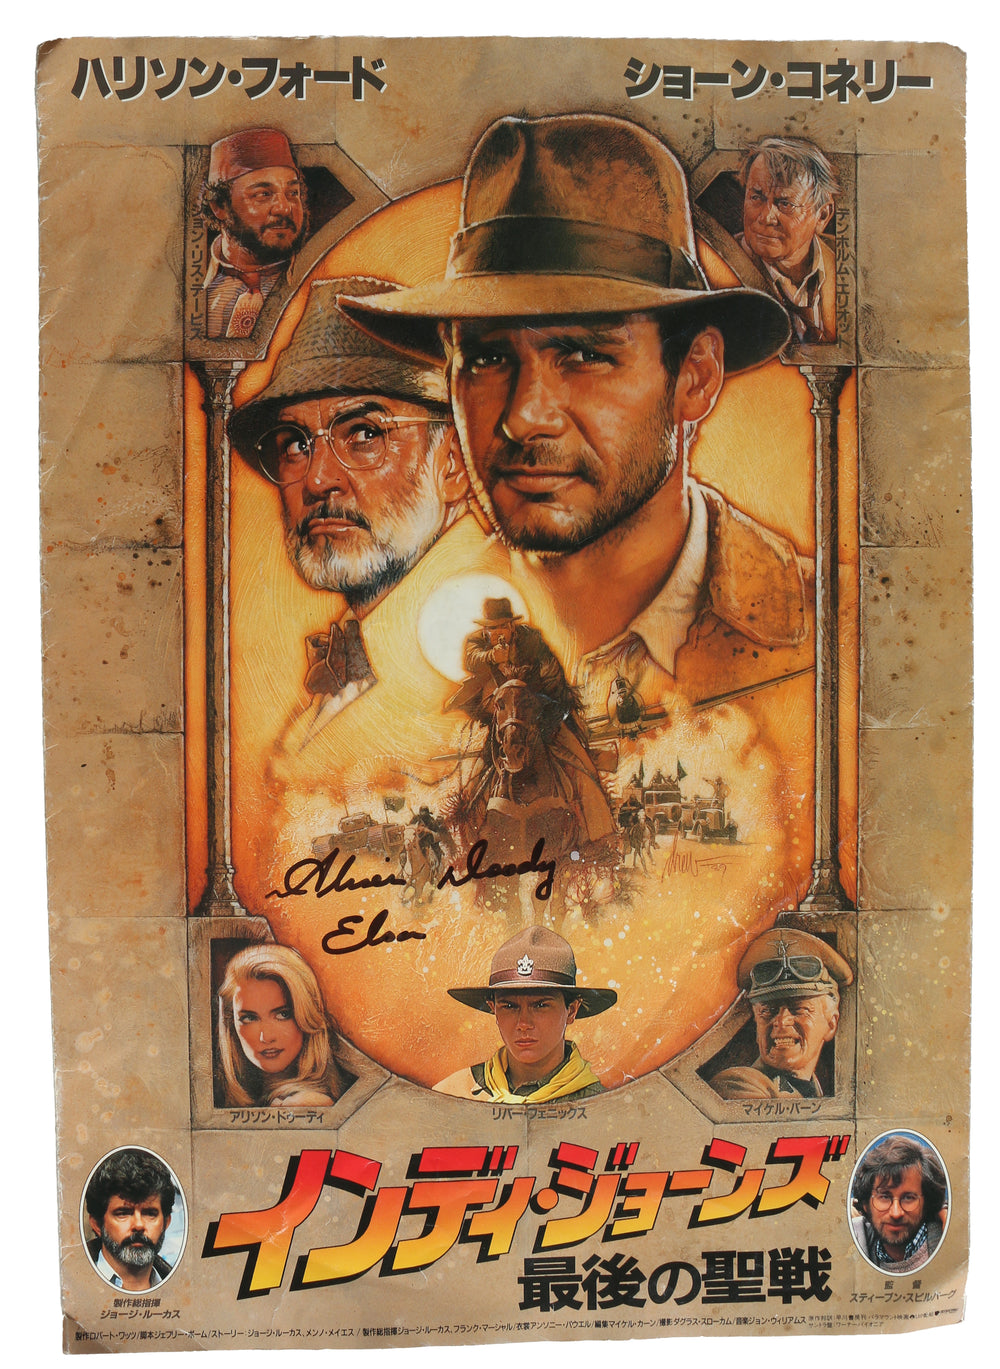 Indiana Jones and the Last Crusade Japanese Program - Signed by Alison Doody